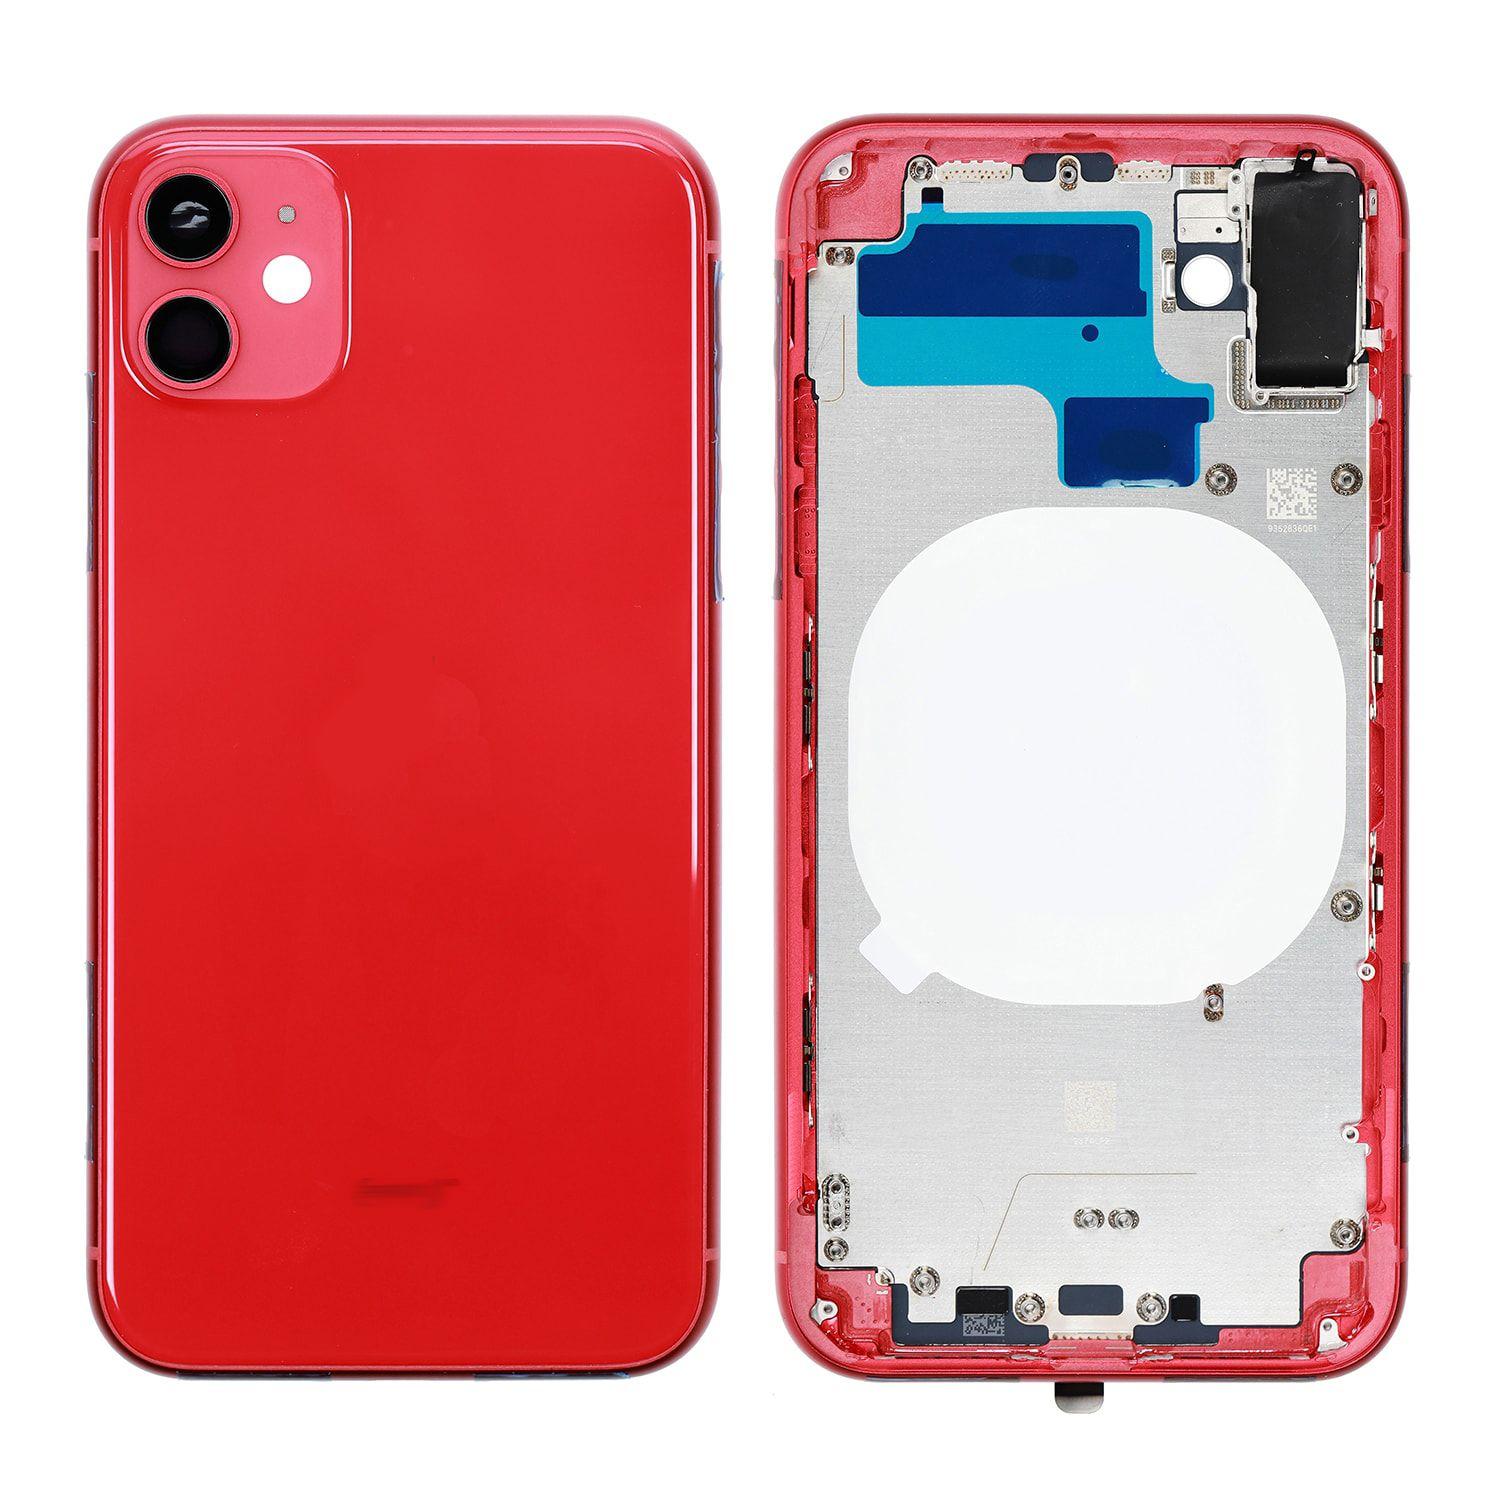 Body for iPhone 11 + back cover red